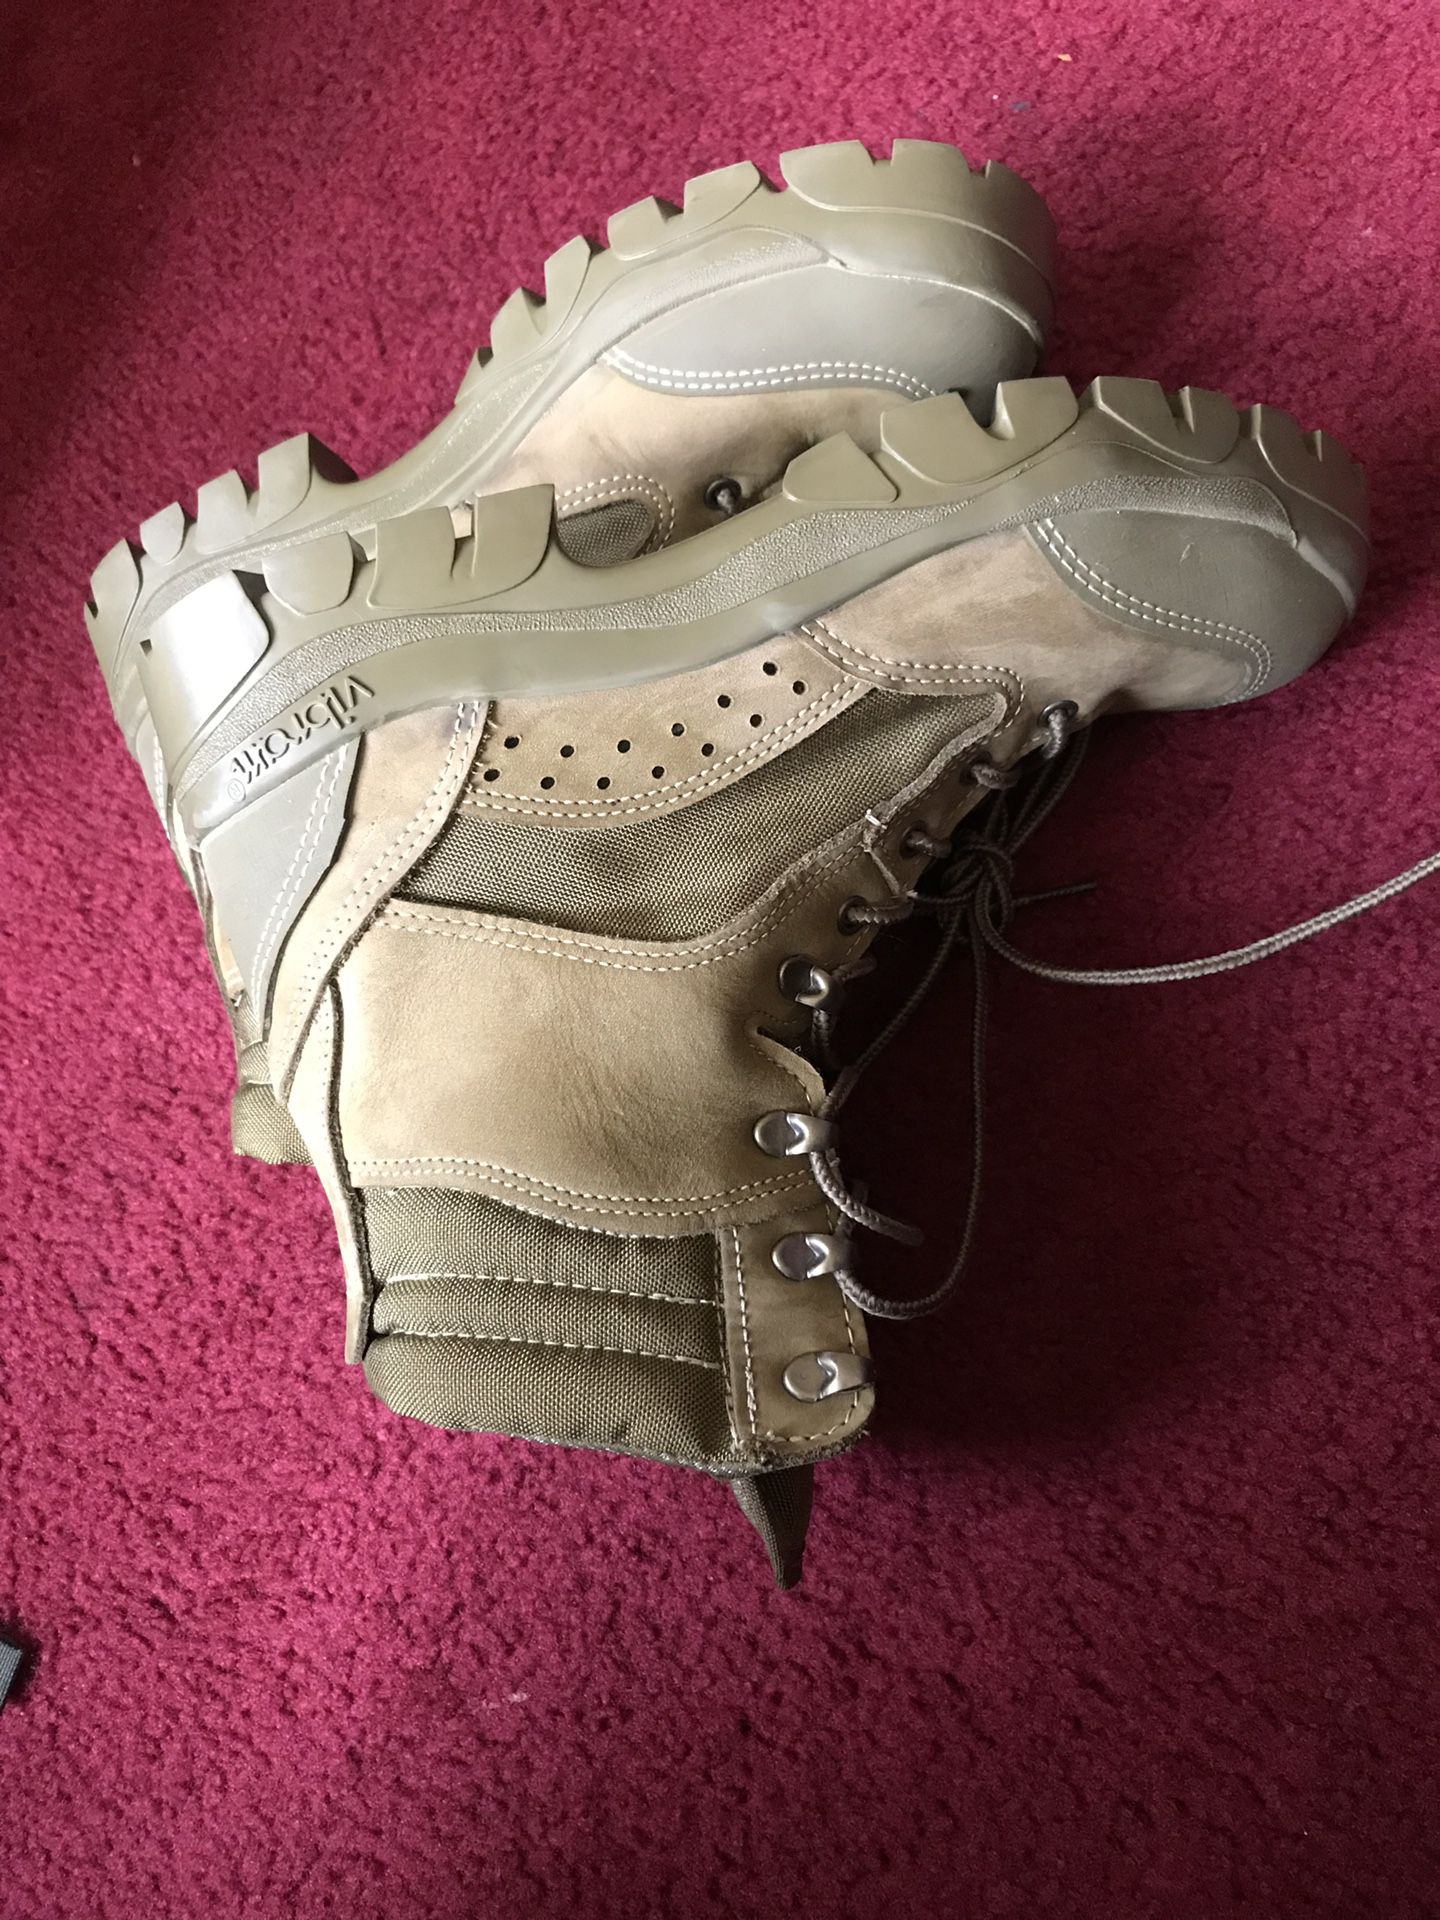 Army boots new size 8.5 or 9